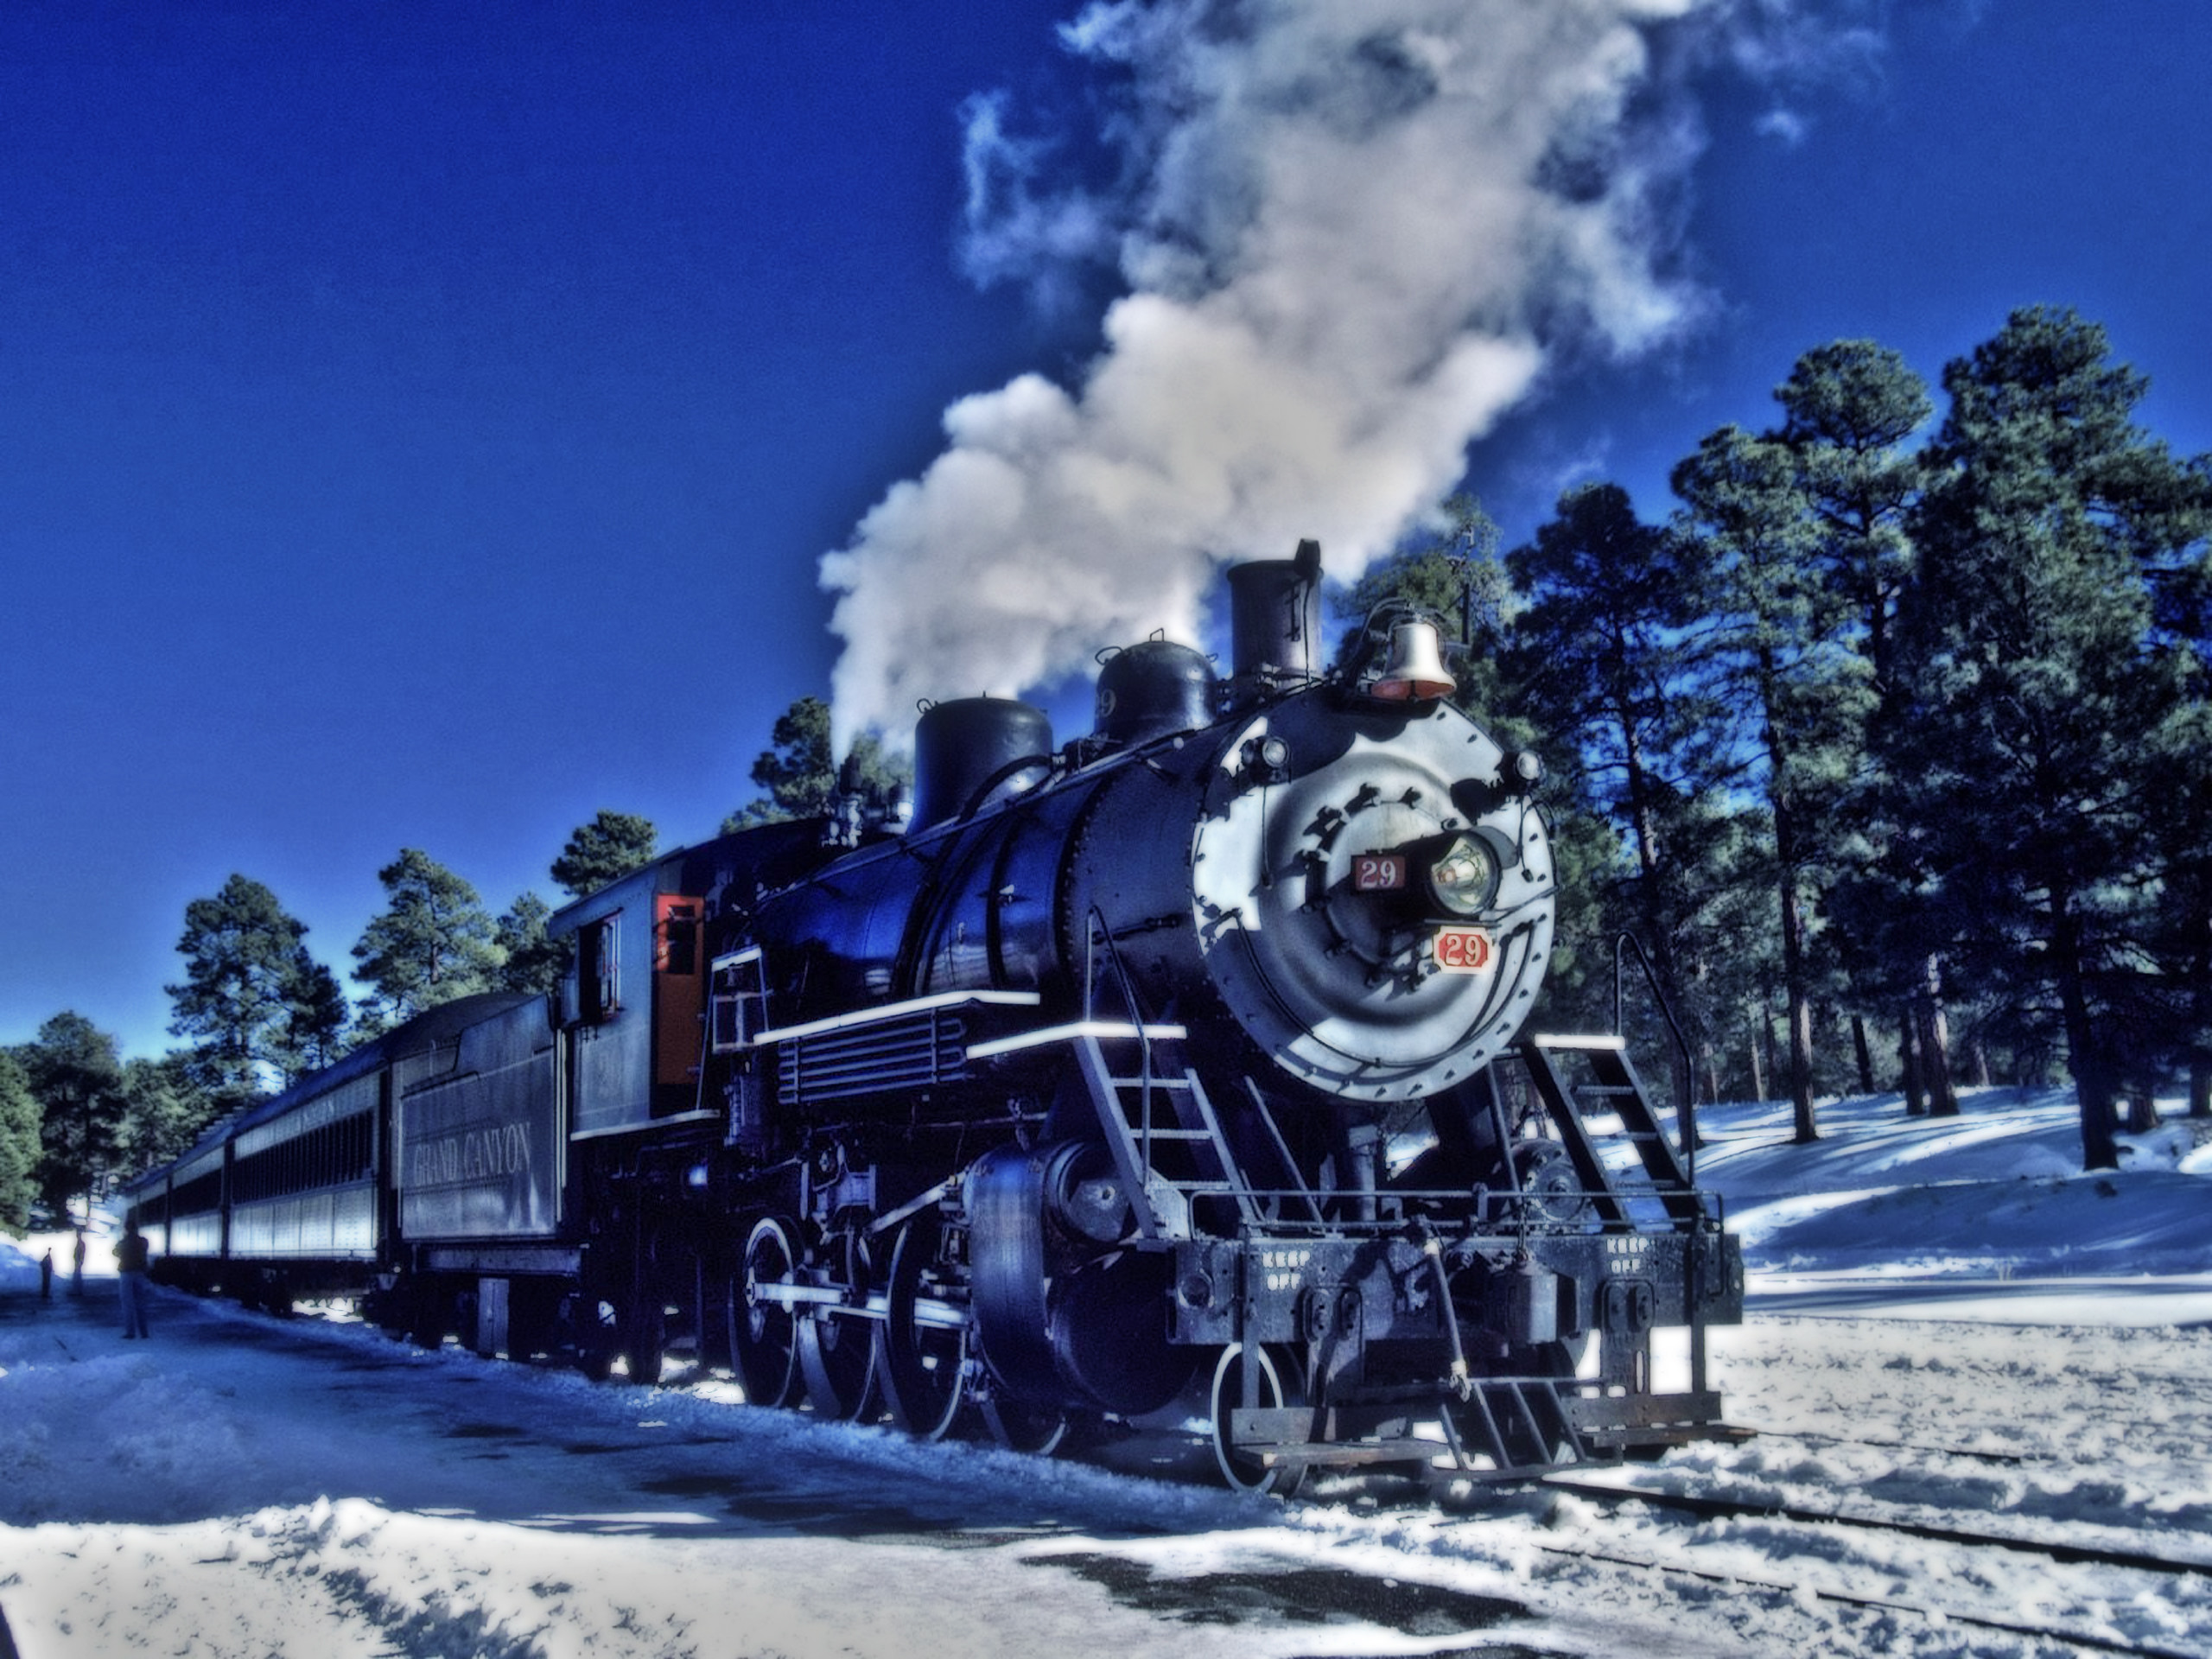 2560x1920 polar express wallpaper iphone - photo #28. Train Pictures | Full HD  Pictures